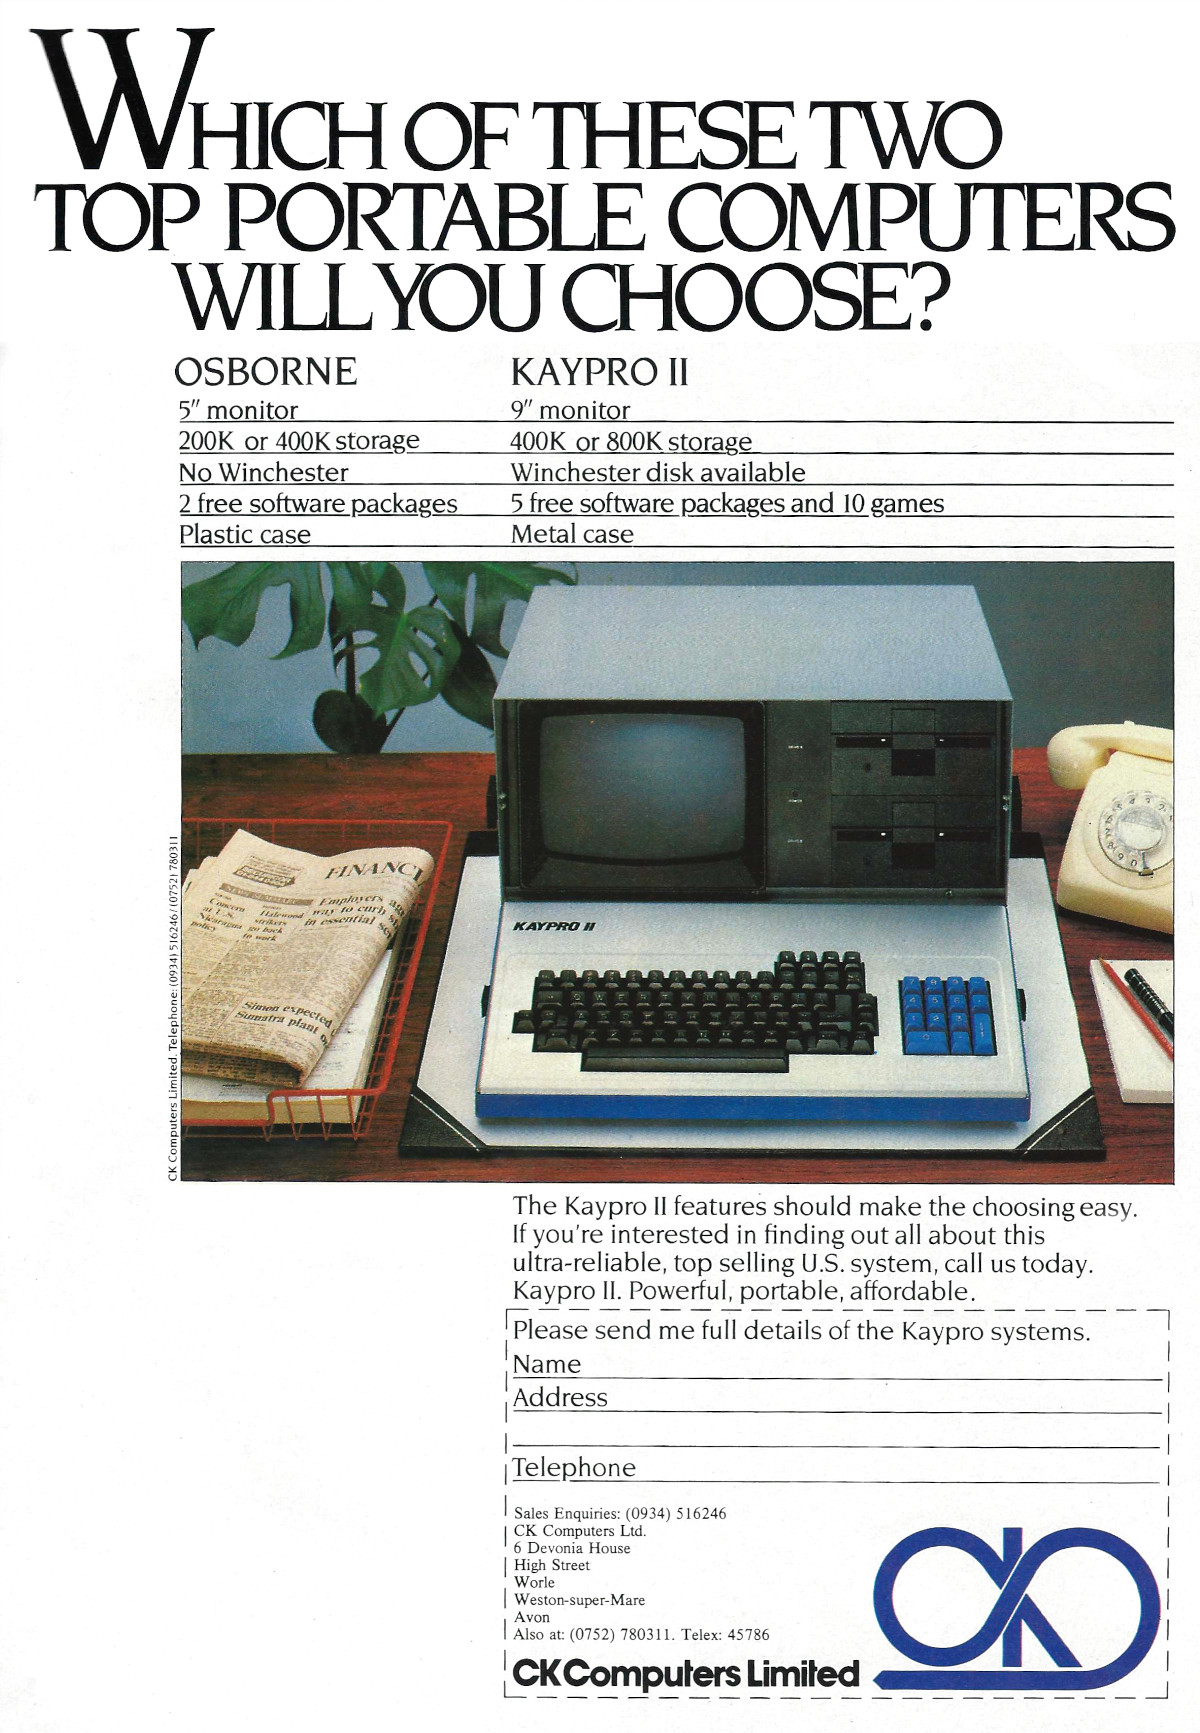 A third-party advert for the Kaypro 2, showing a small comparison table with its competitor - the Osborne 1. From Personal Computer World, October 1983